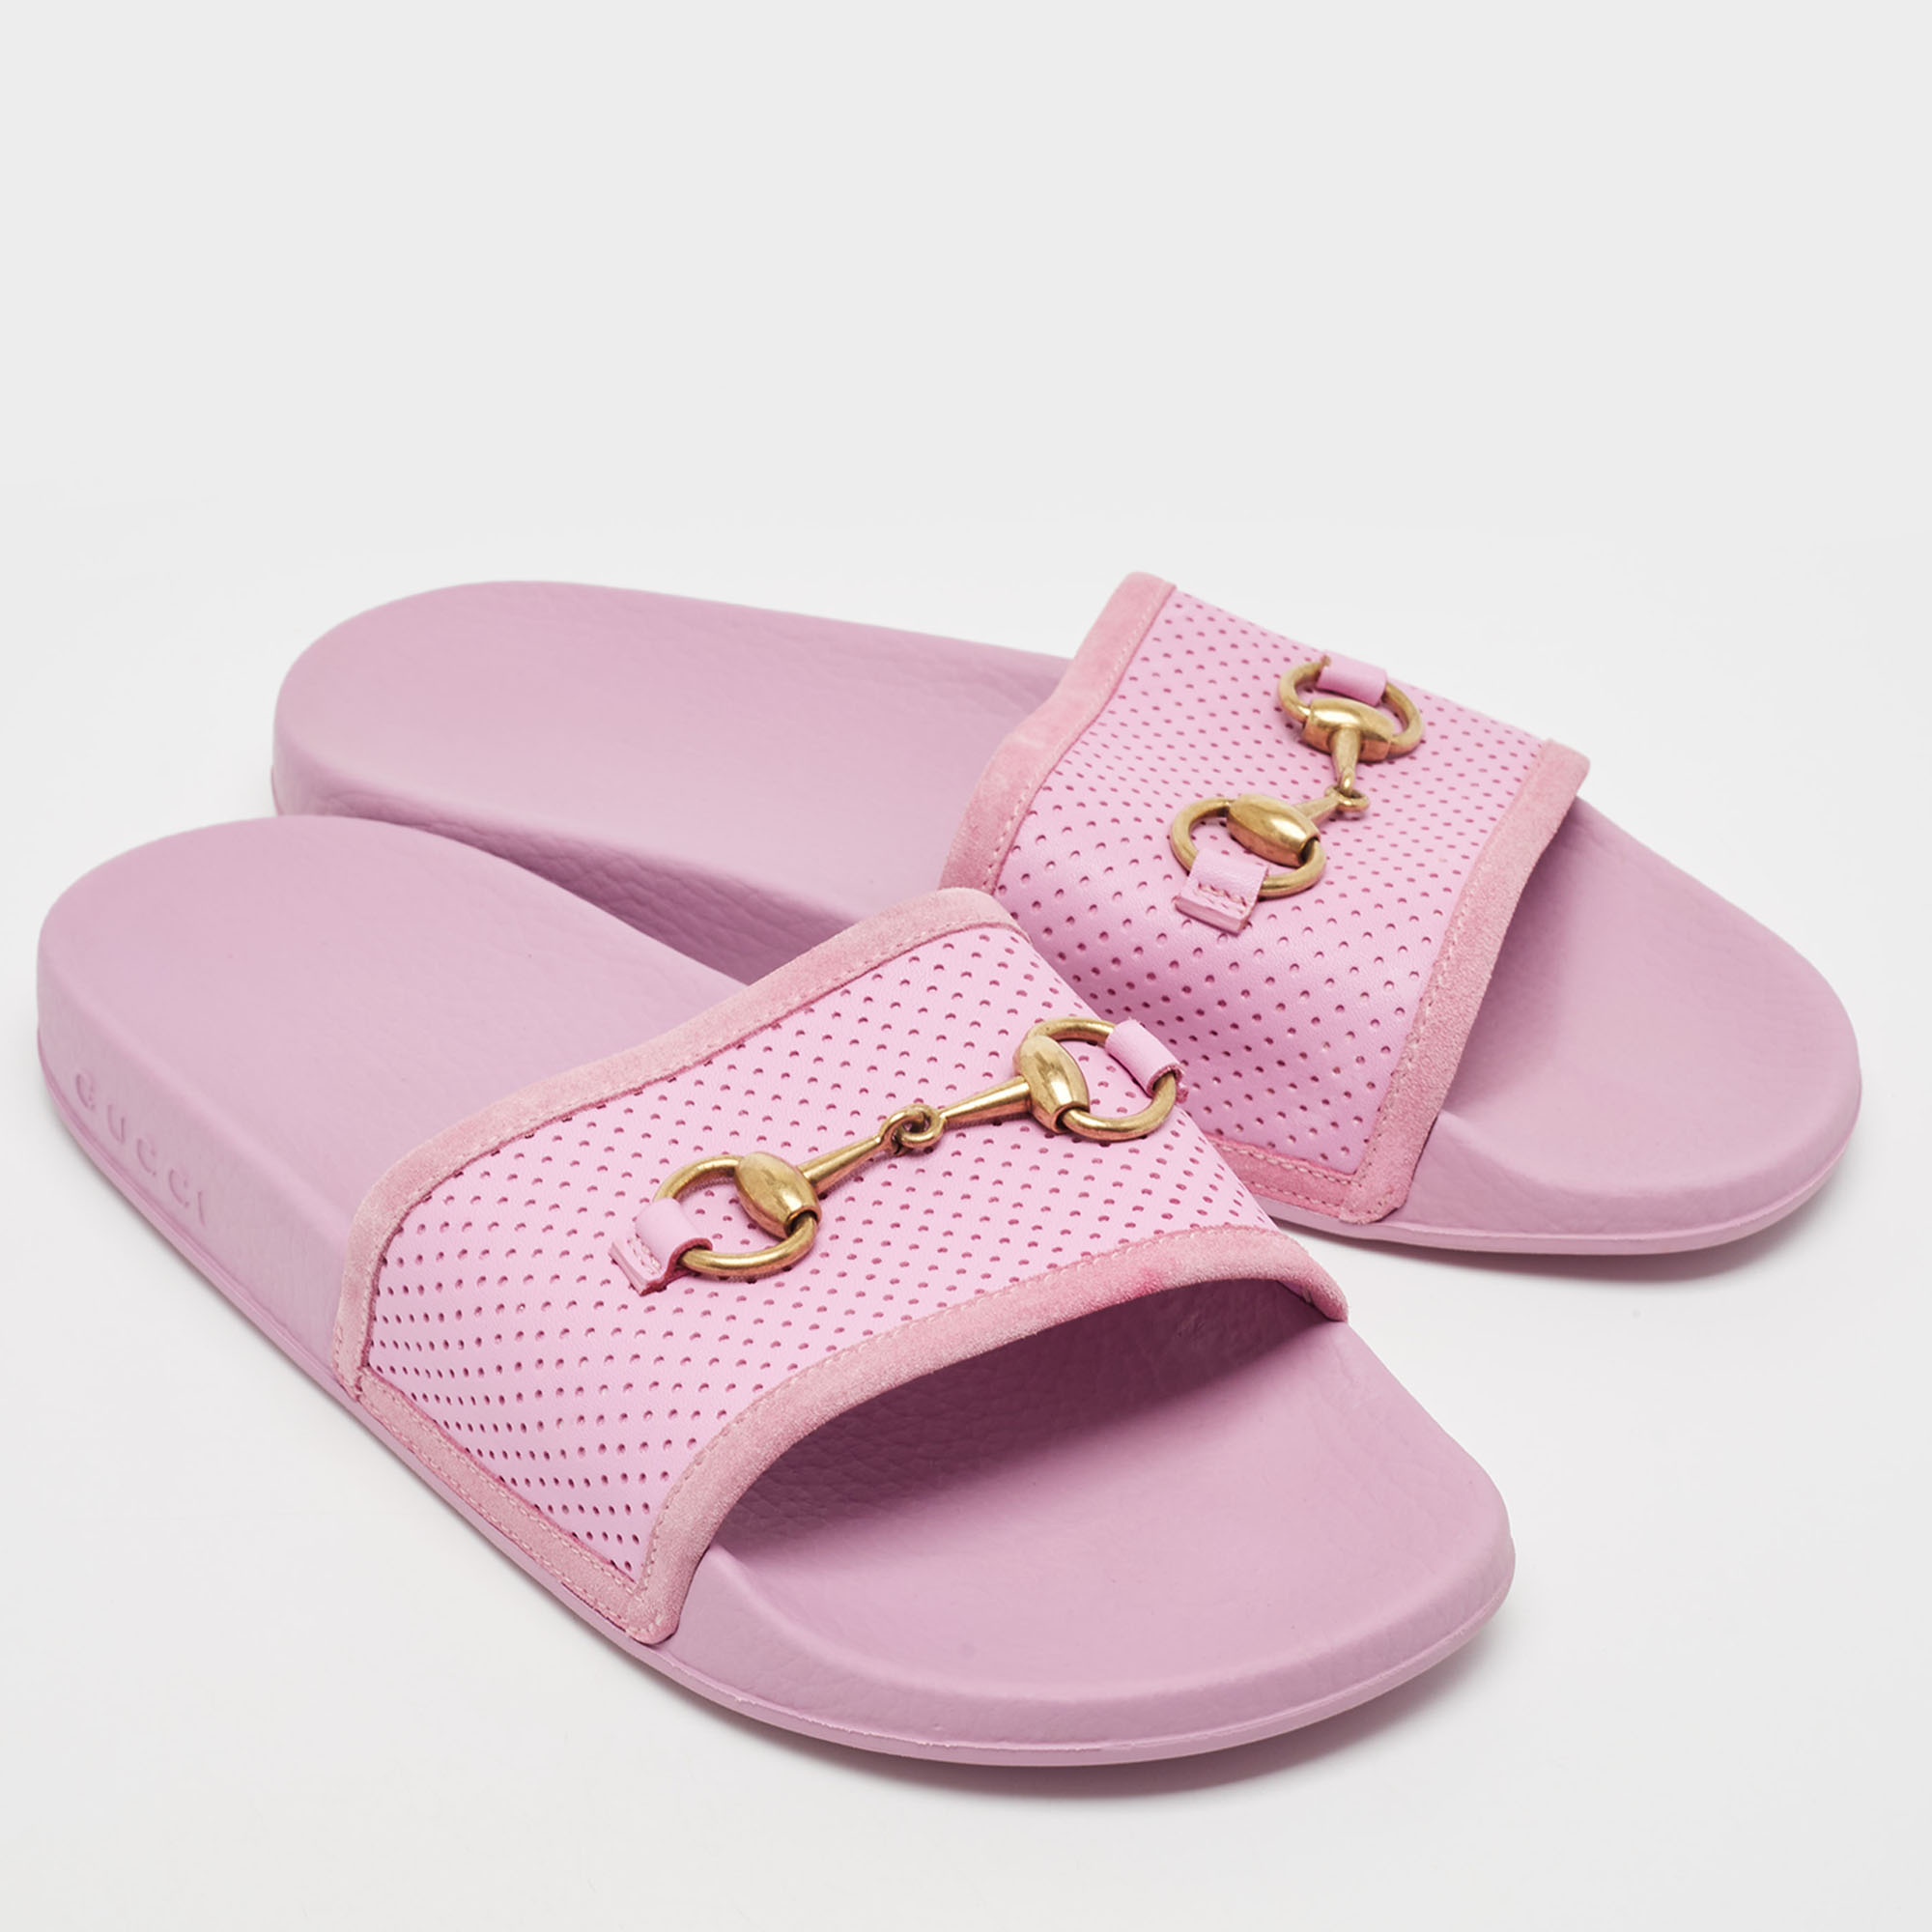 Gucci Purple Perforated Leather Horsebit Slides Size 39